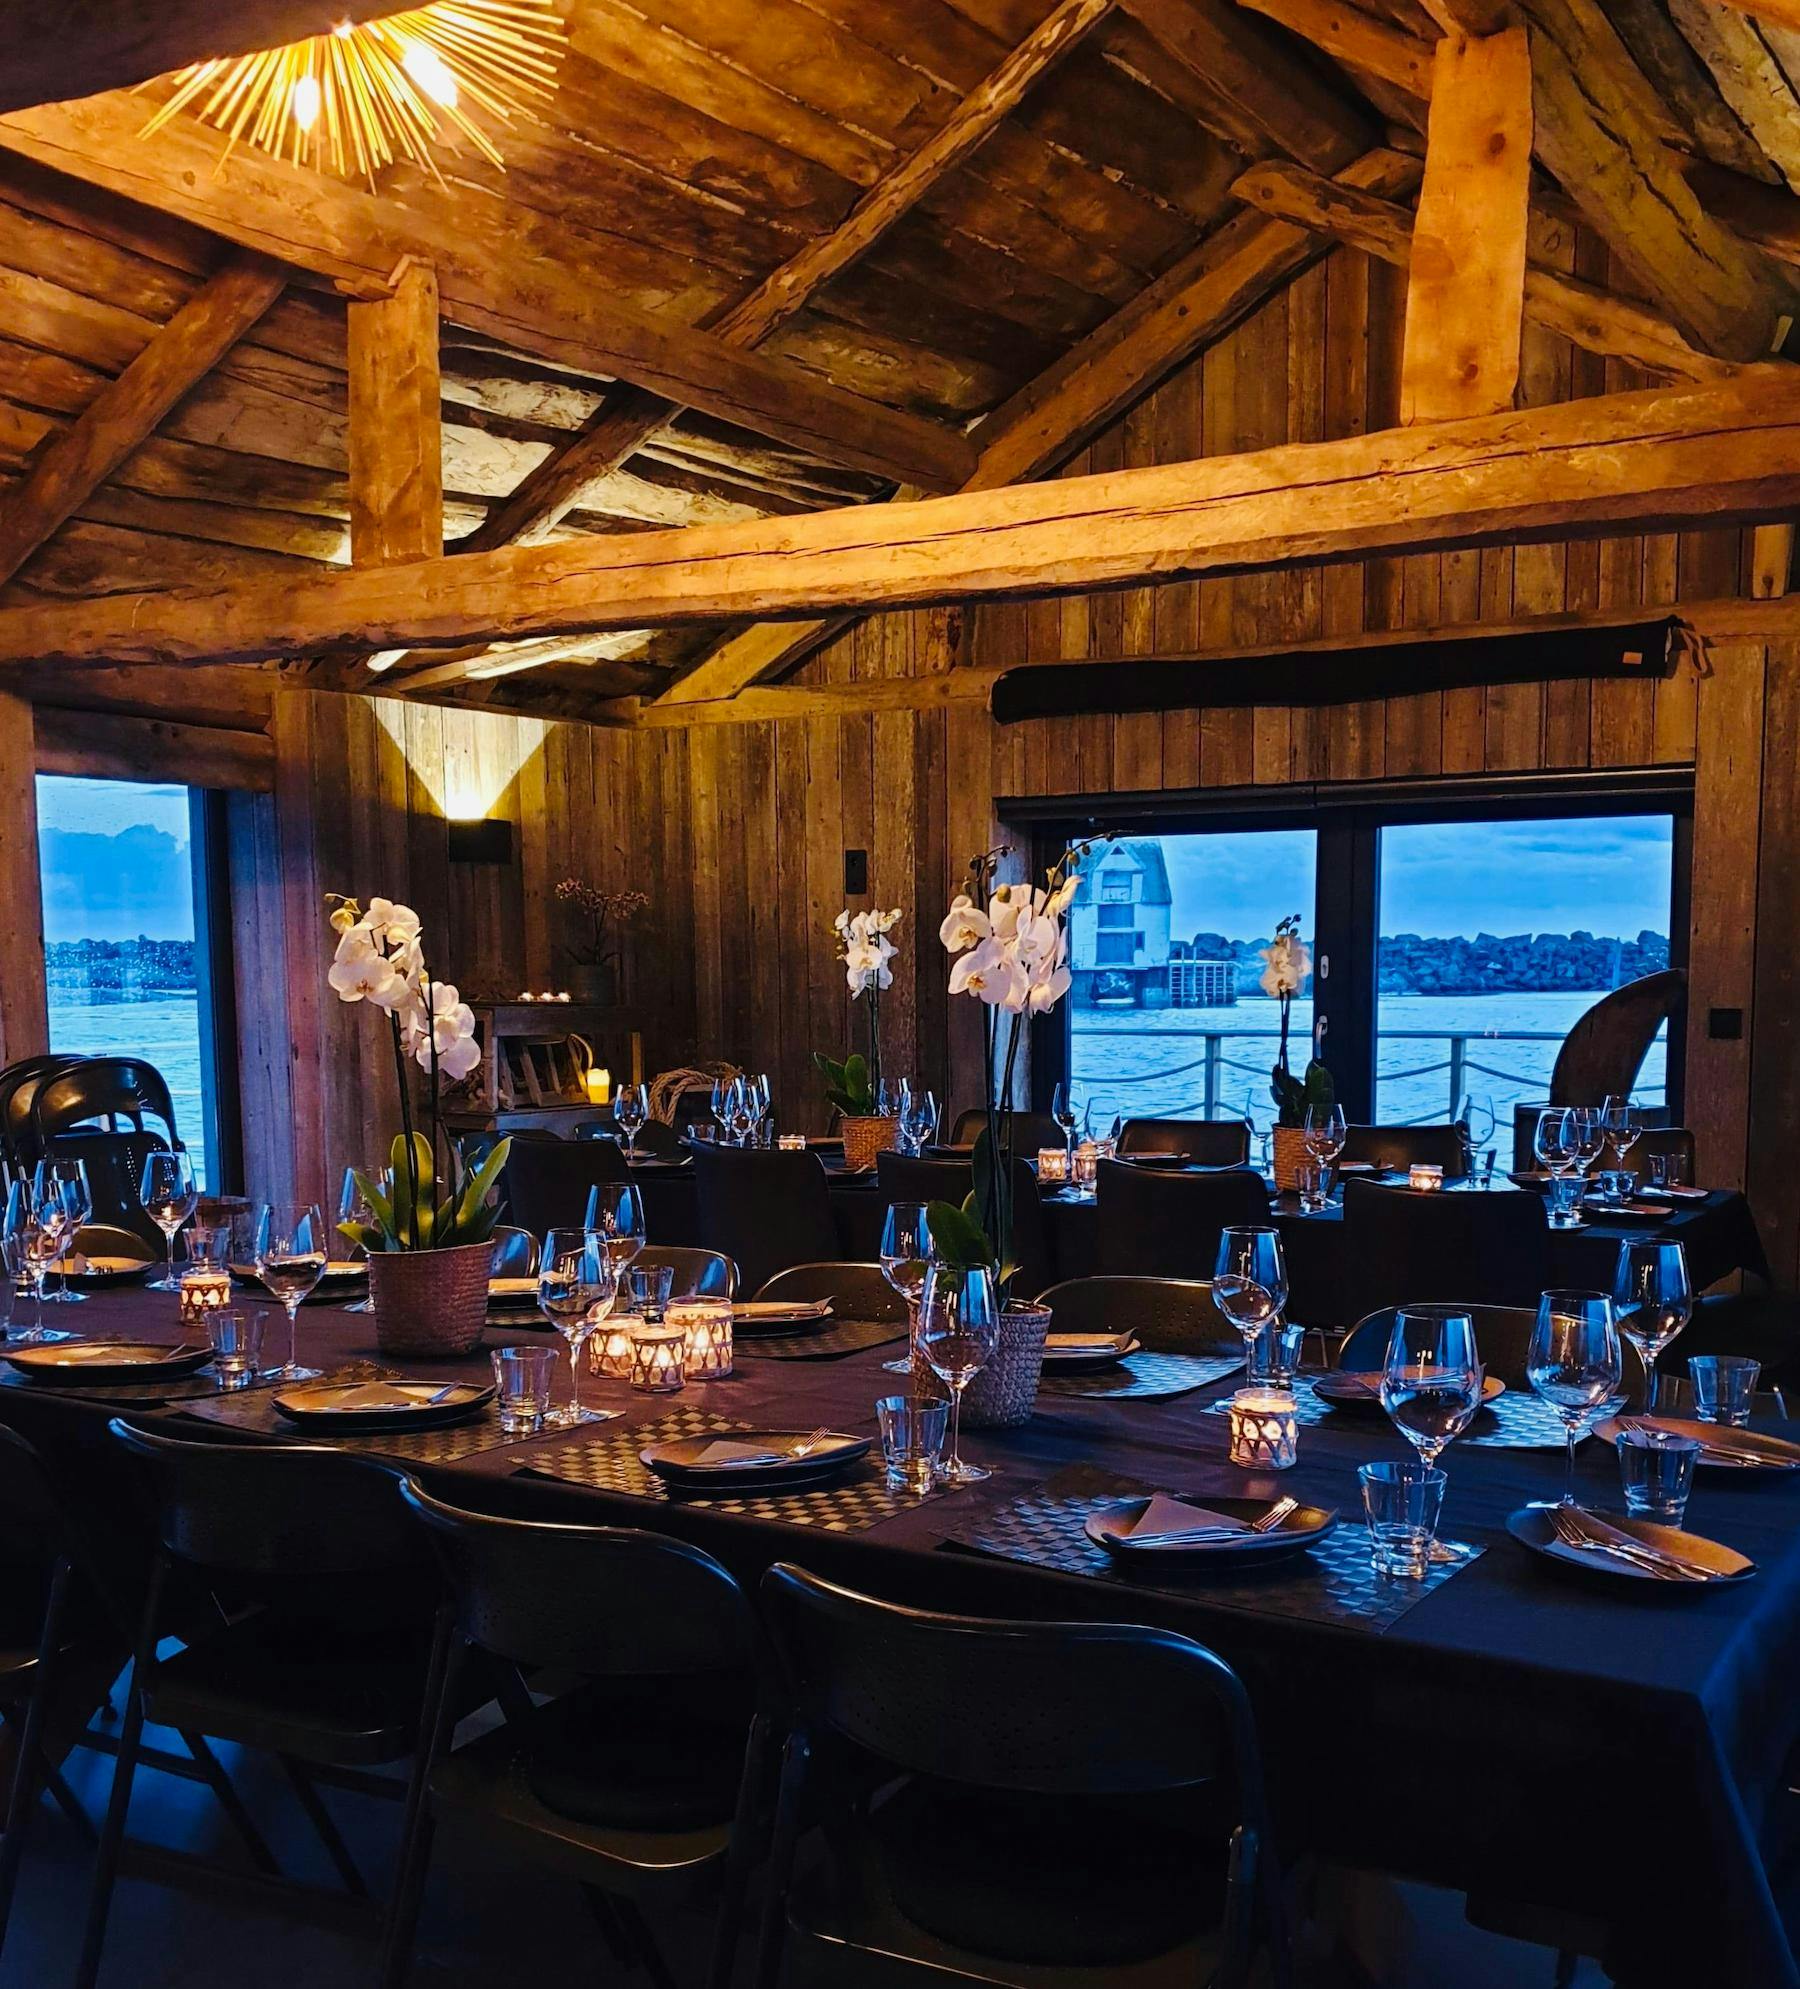 Dinner in old boathouse in Norway